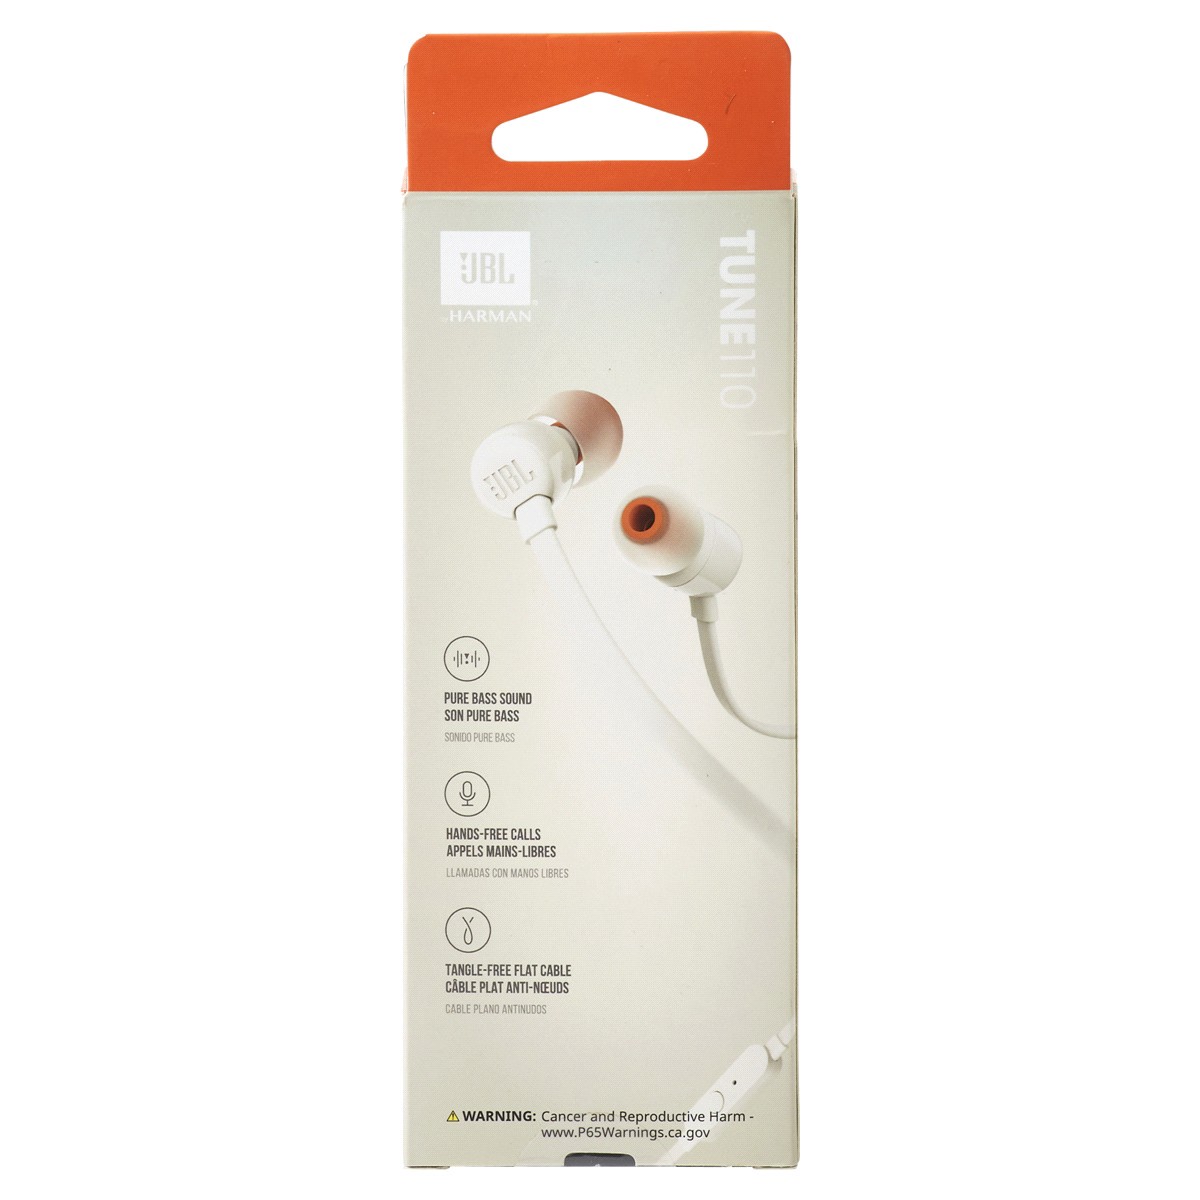 slide 5 of 5, JBL Tune Wired Earbuds White, 1 ct